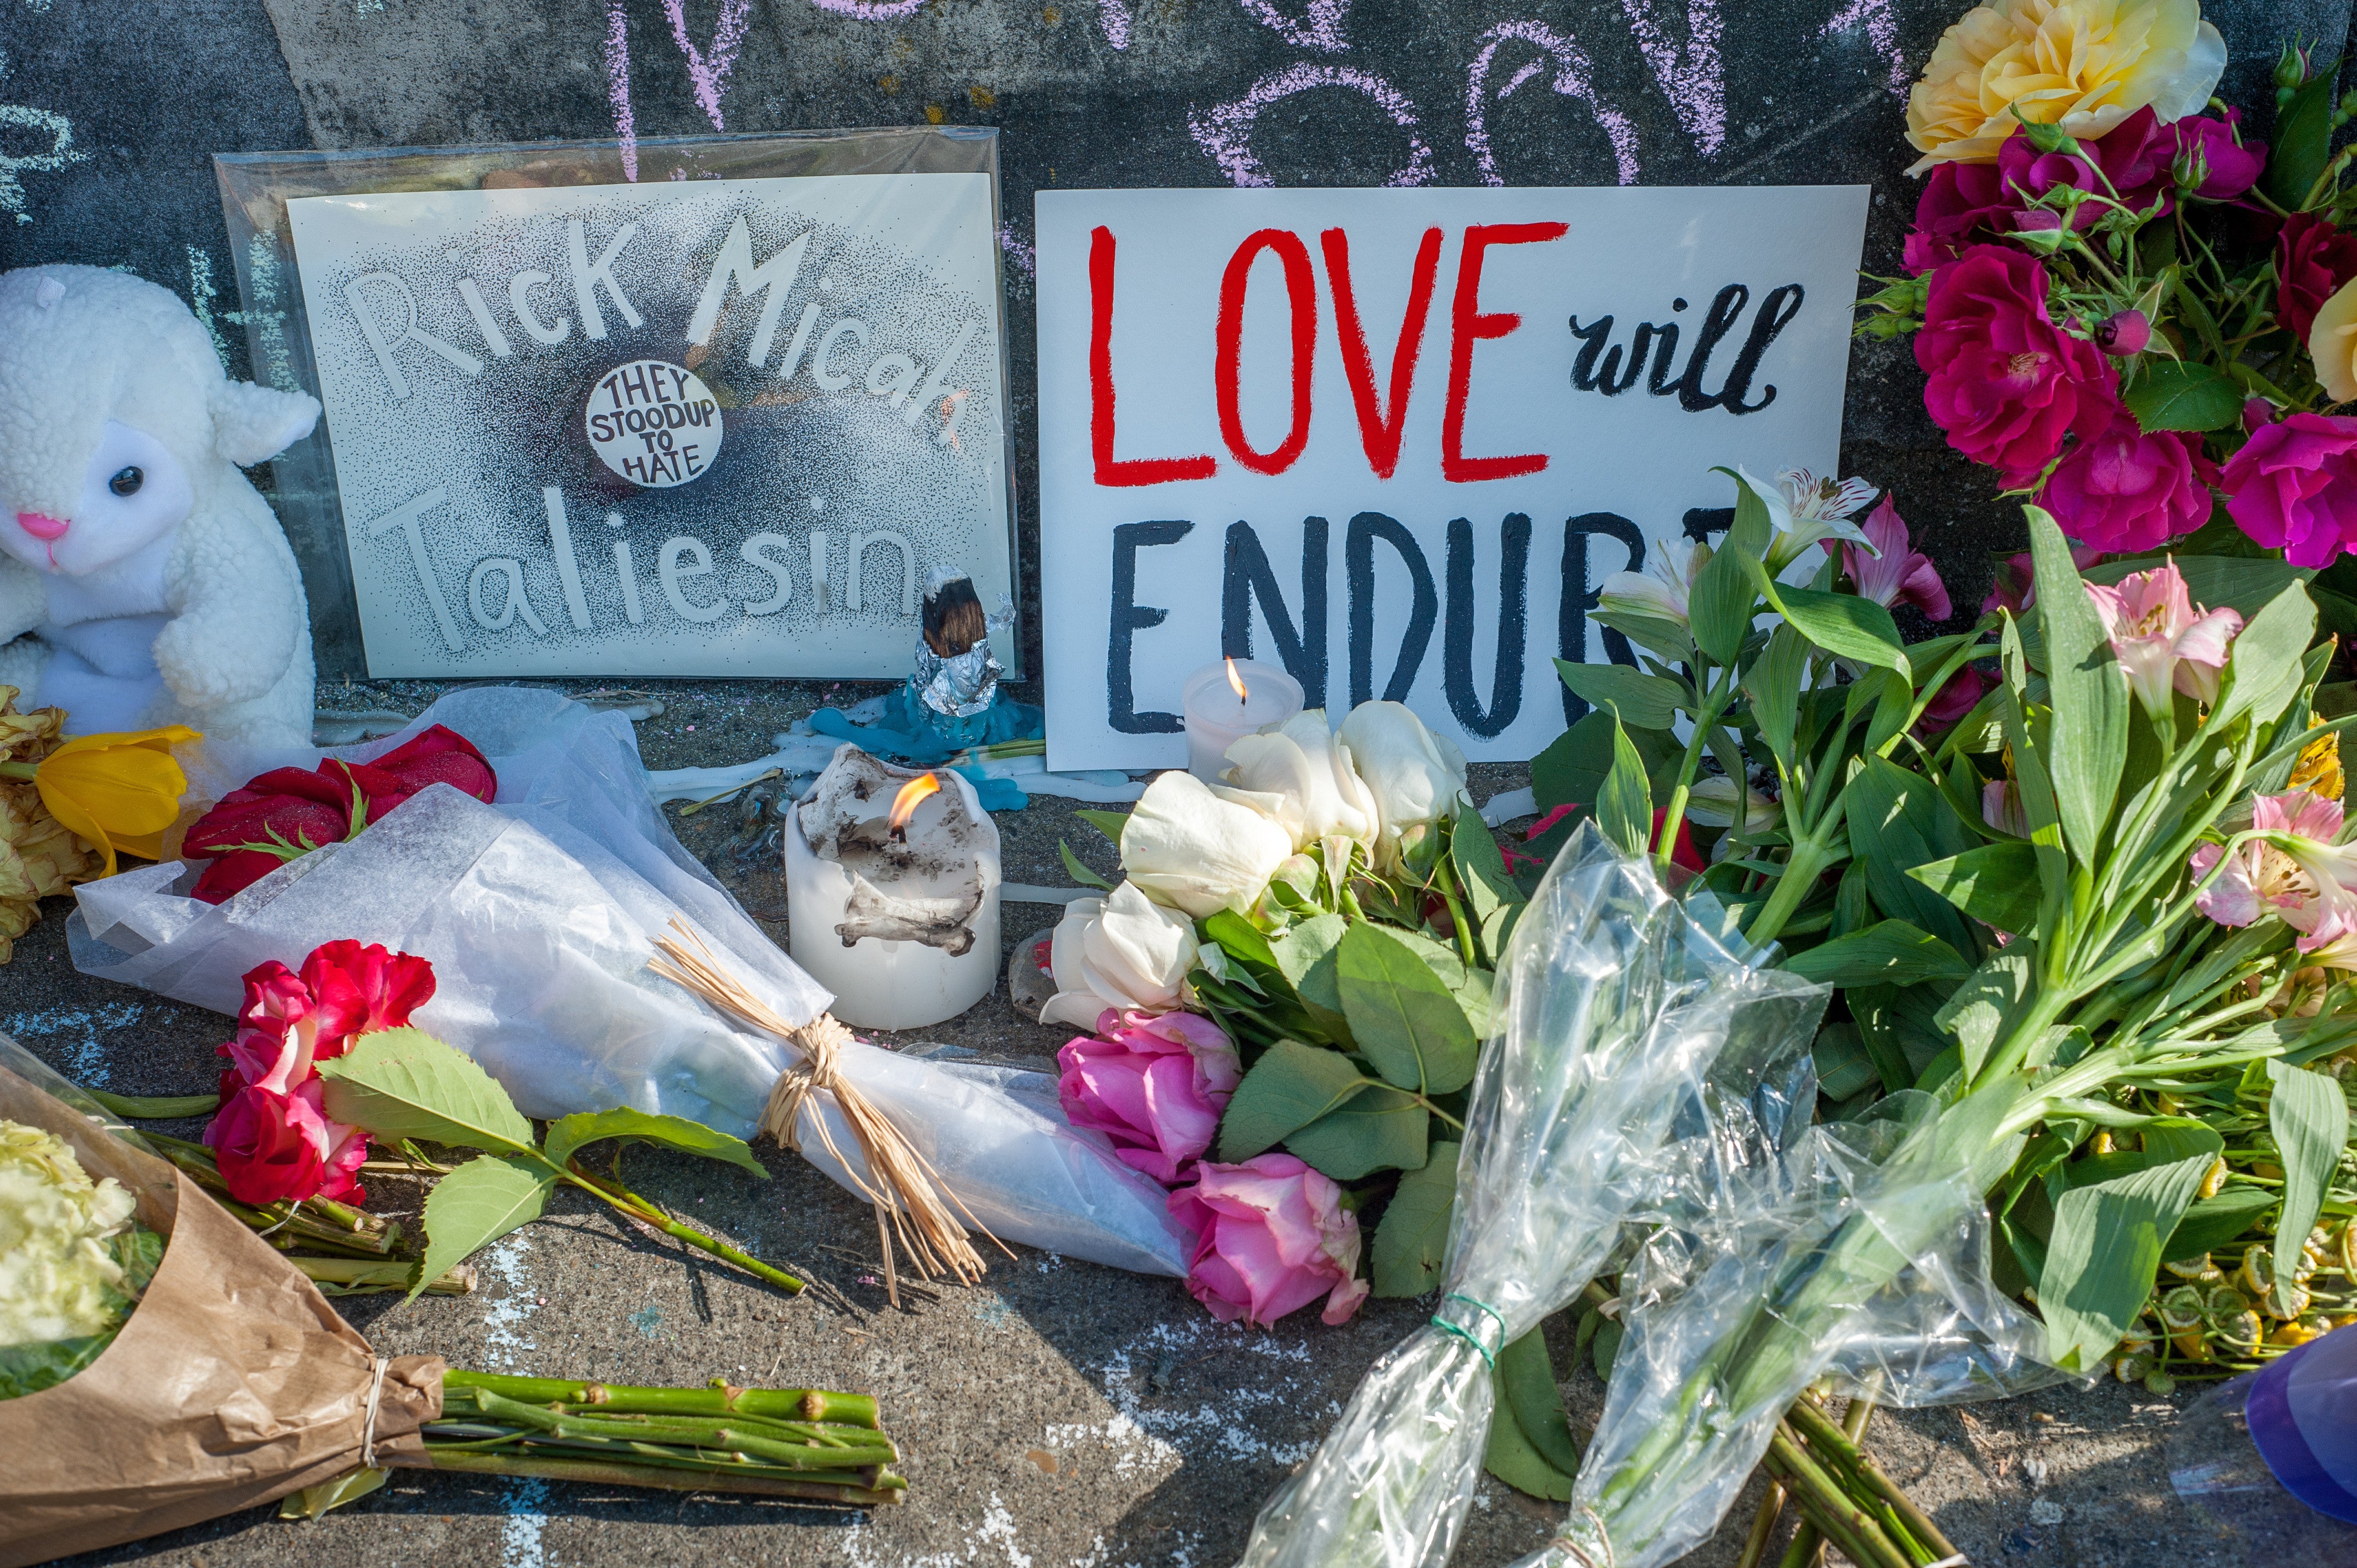 Muslim Groups Raise Thousands Of Dollars For Portland Victims
